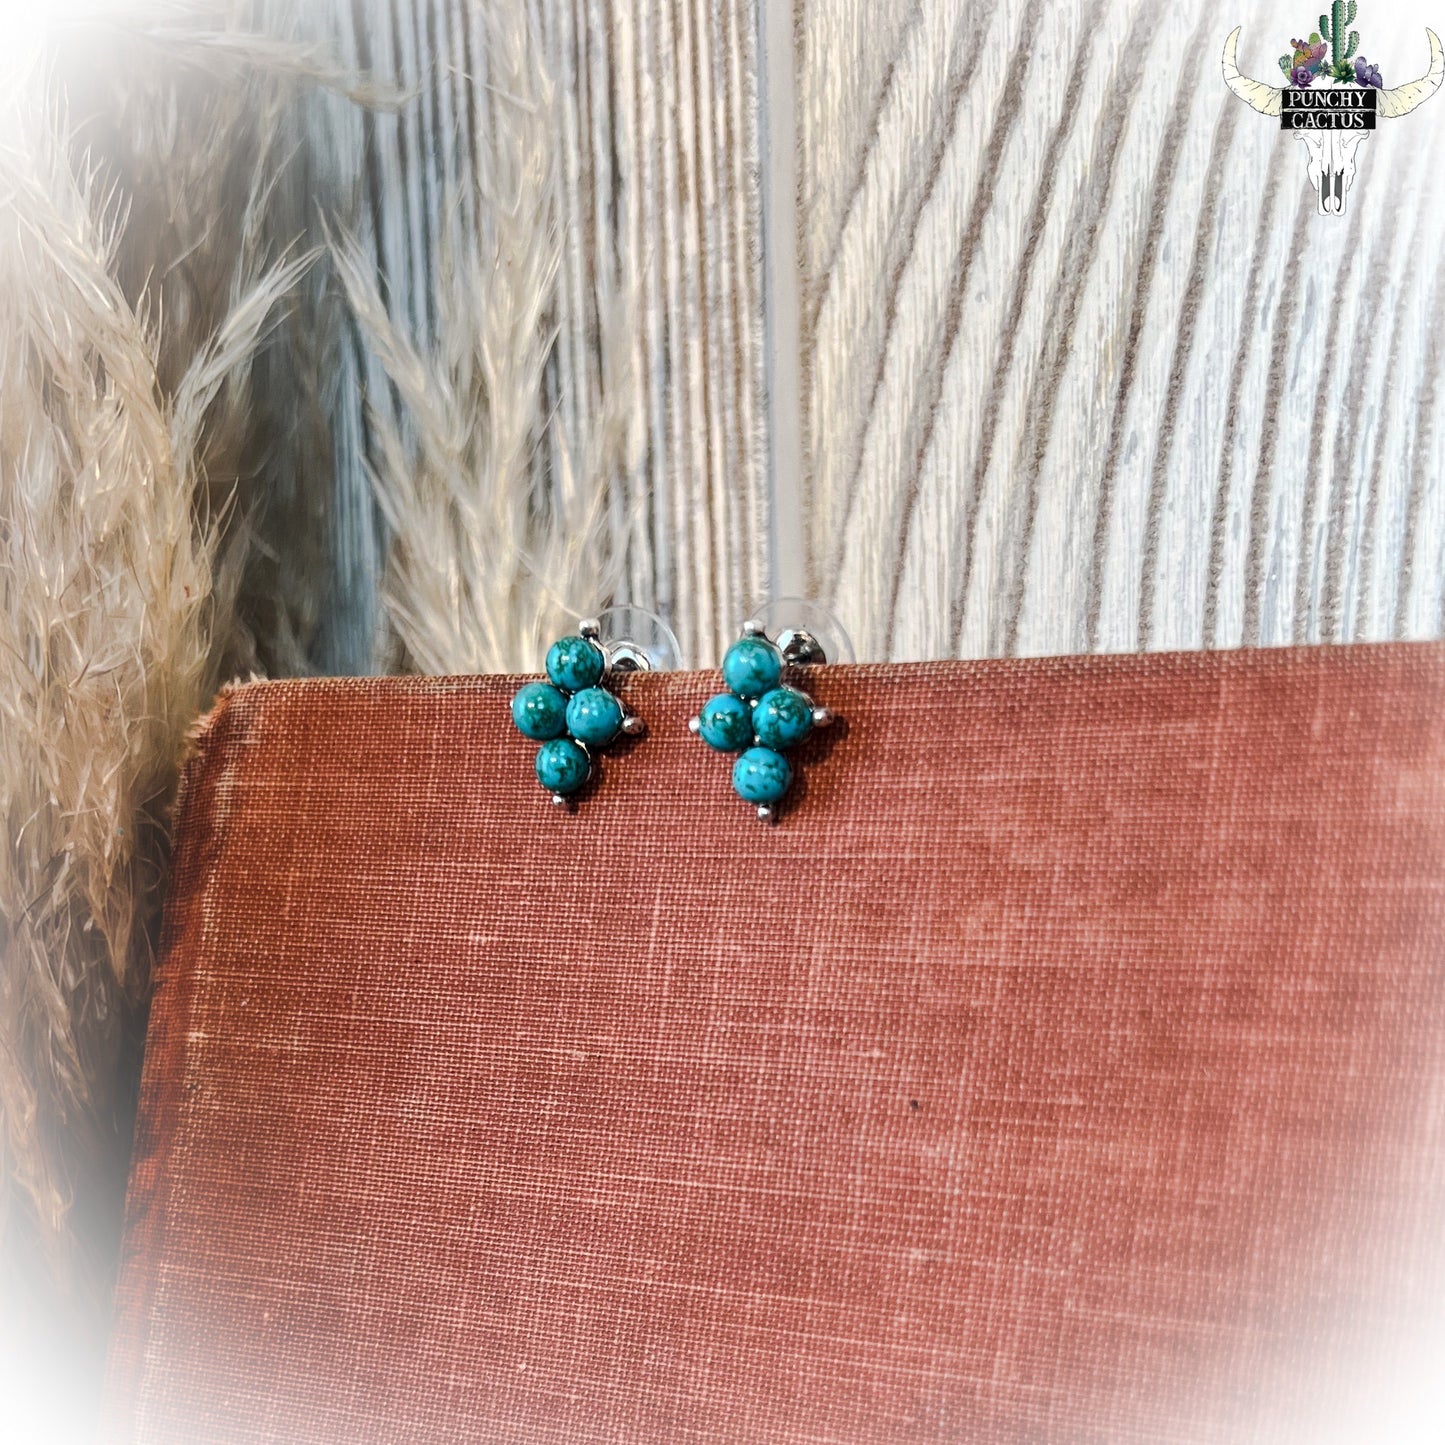 Turquoise Natural Stone Post Earrings